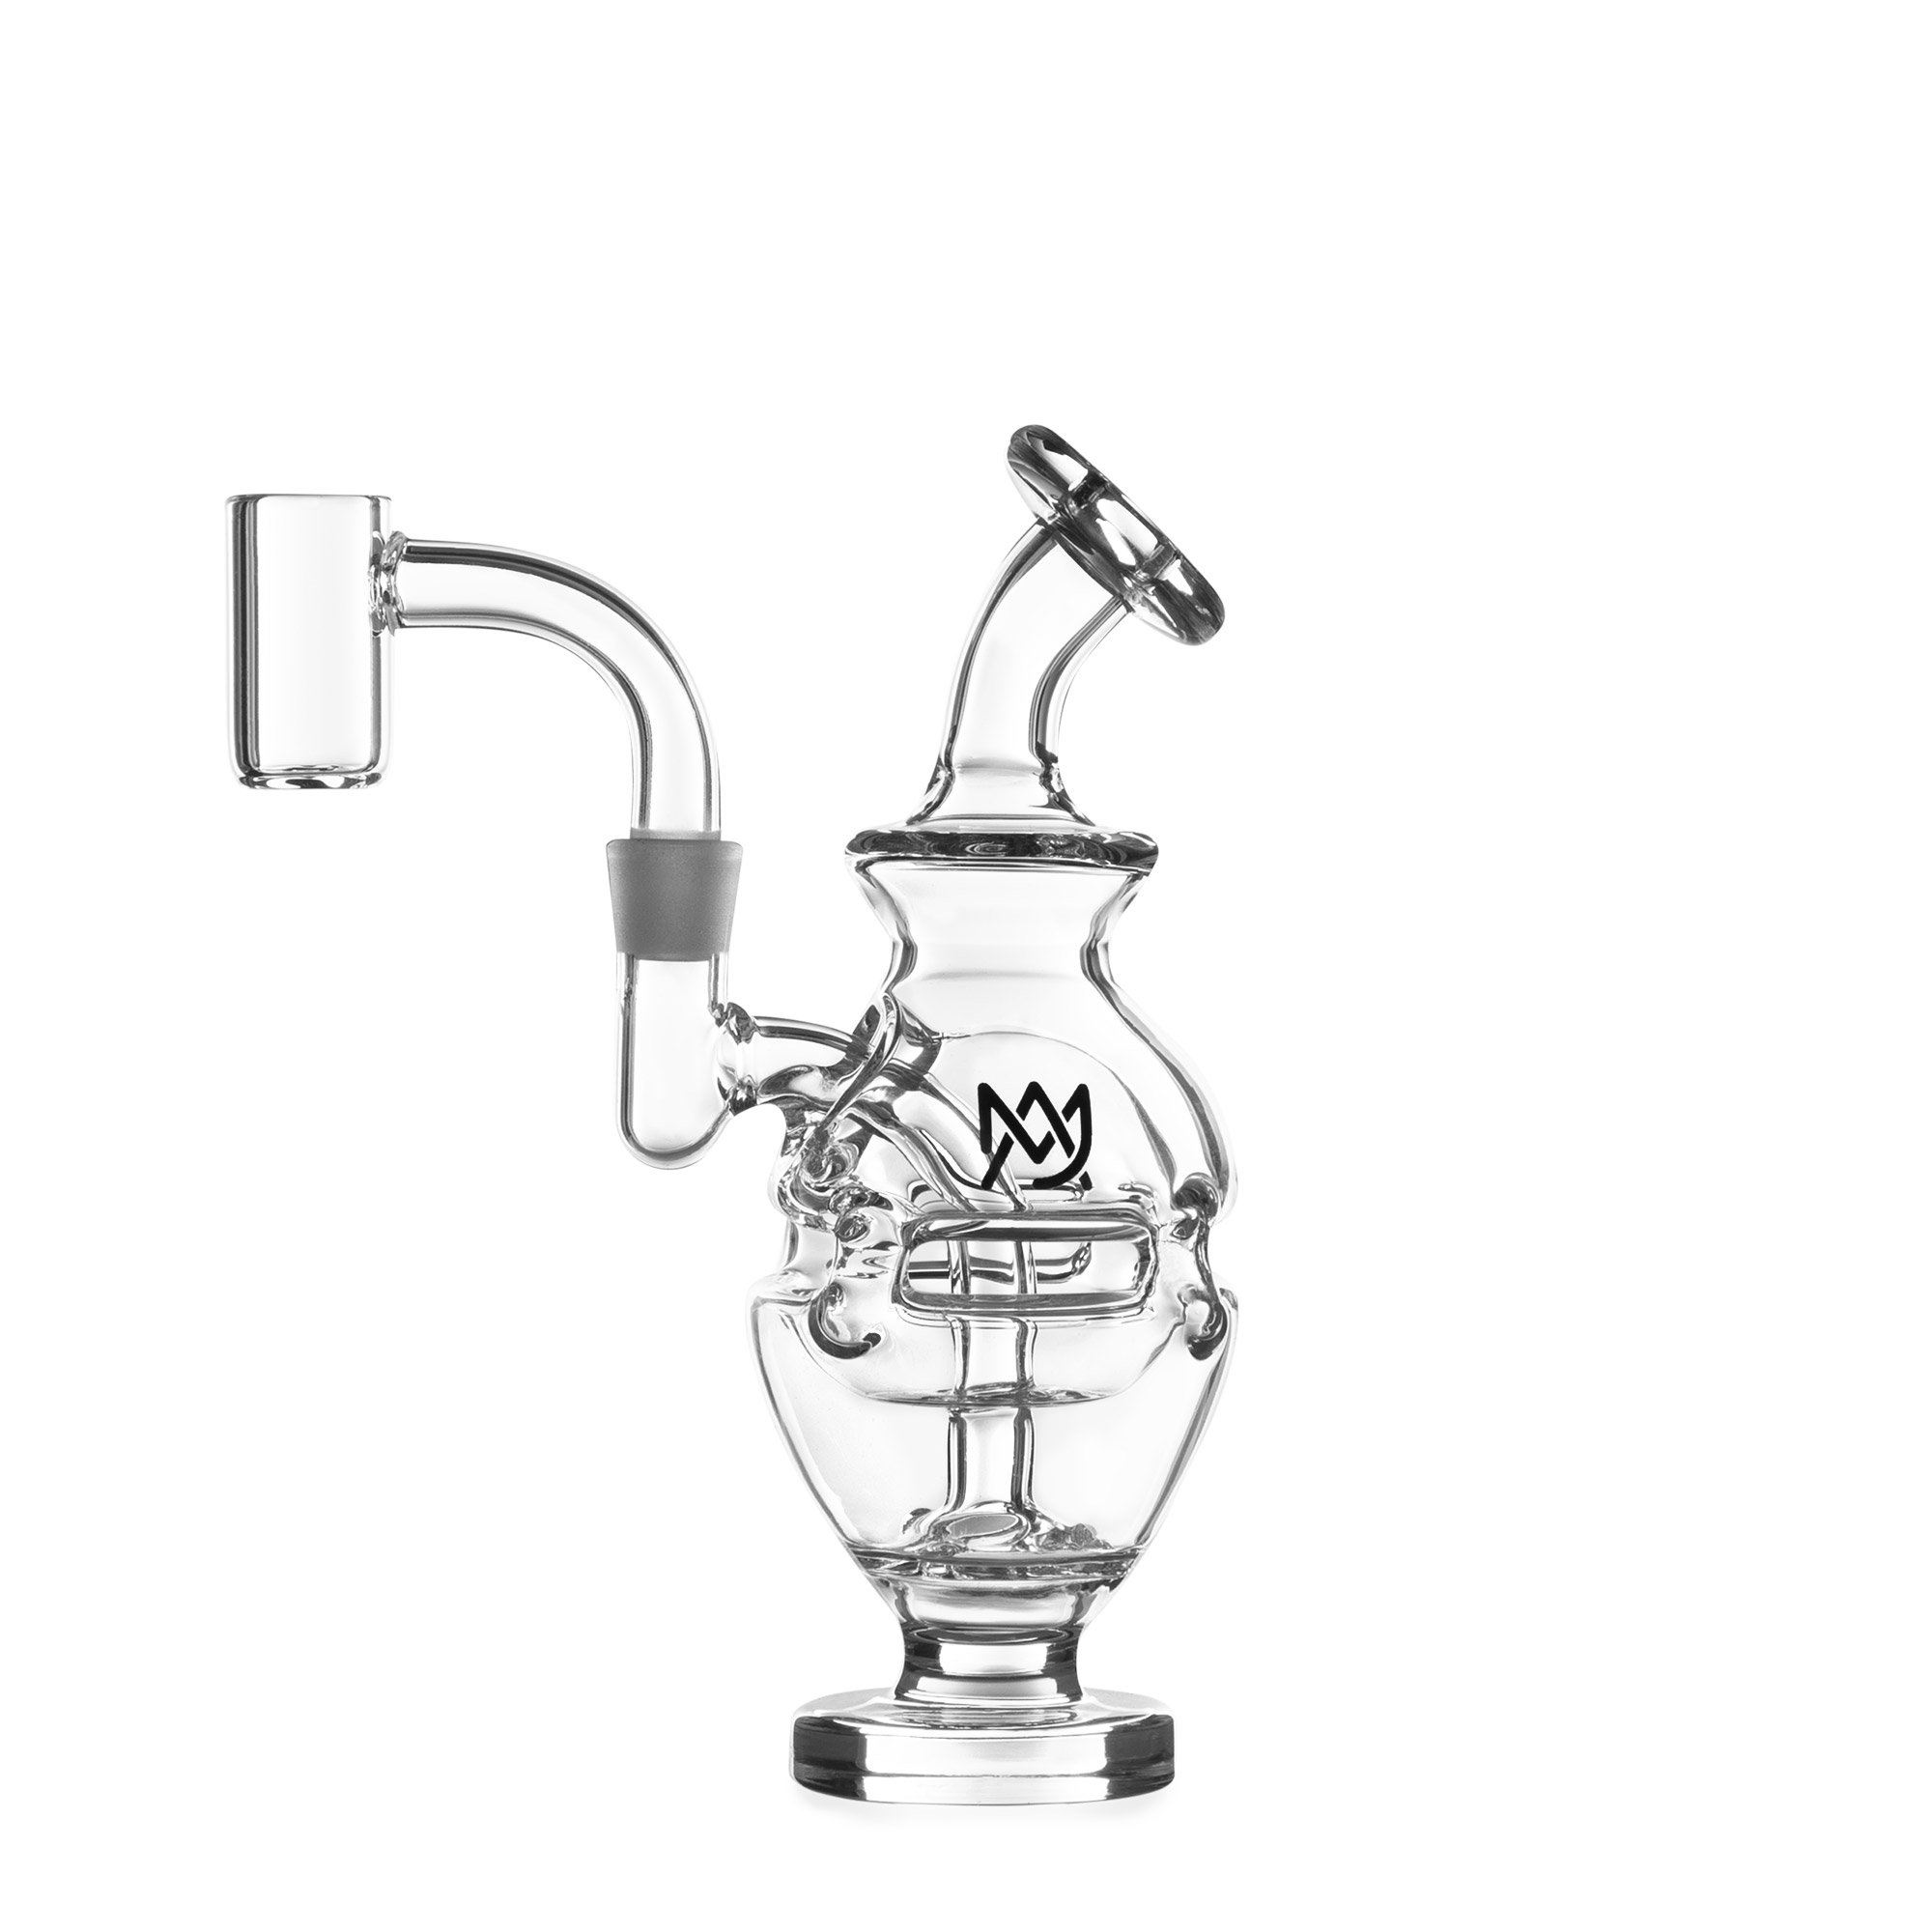 MJ Arsenal 'Royale' Mini Rig / $ 48.99 available at 420 Science